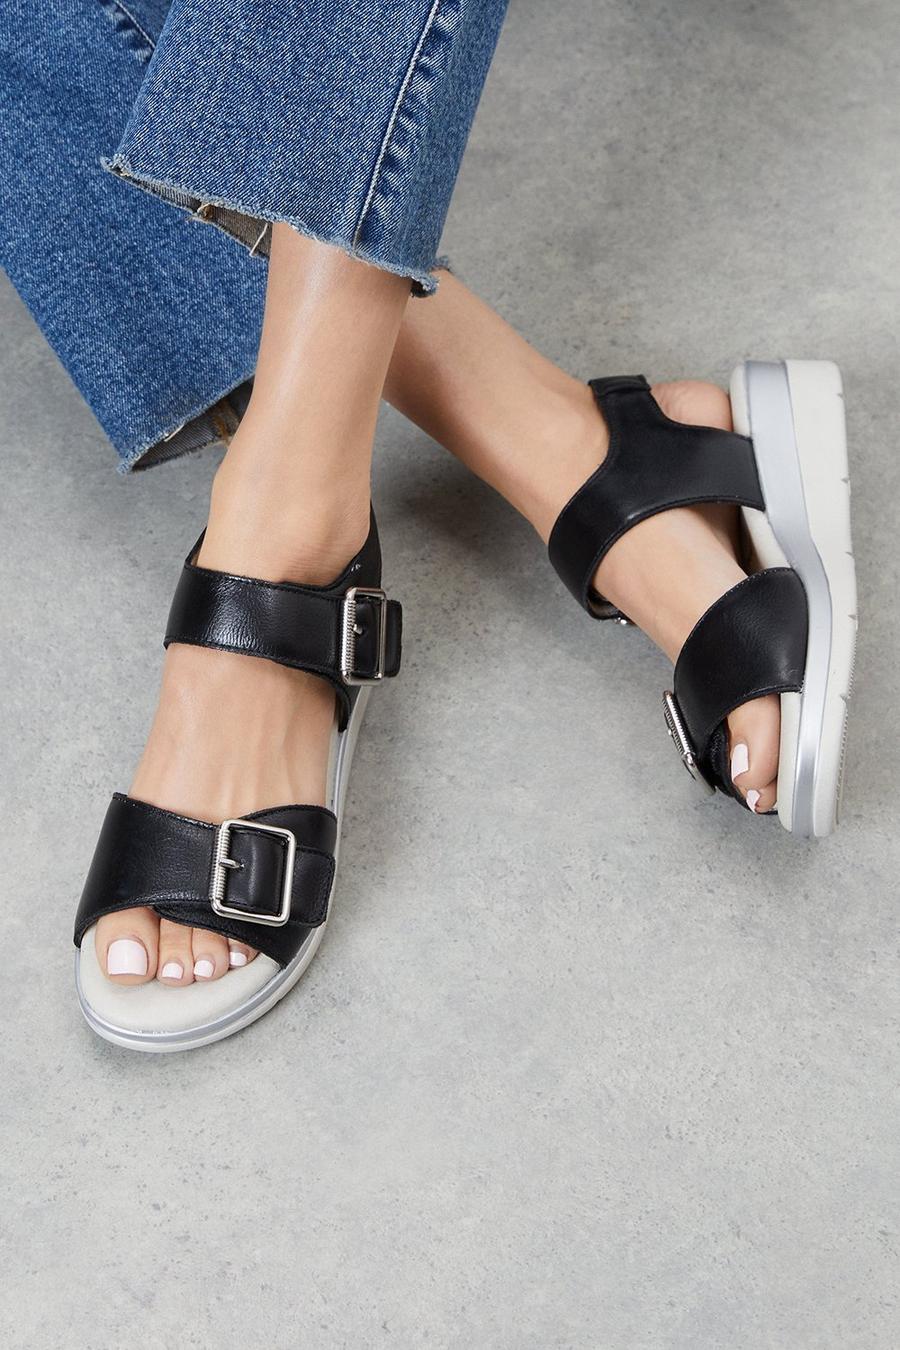 Good For The Sole: Leather Comfort Tullie Buckle Flat Sandal